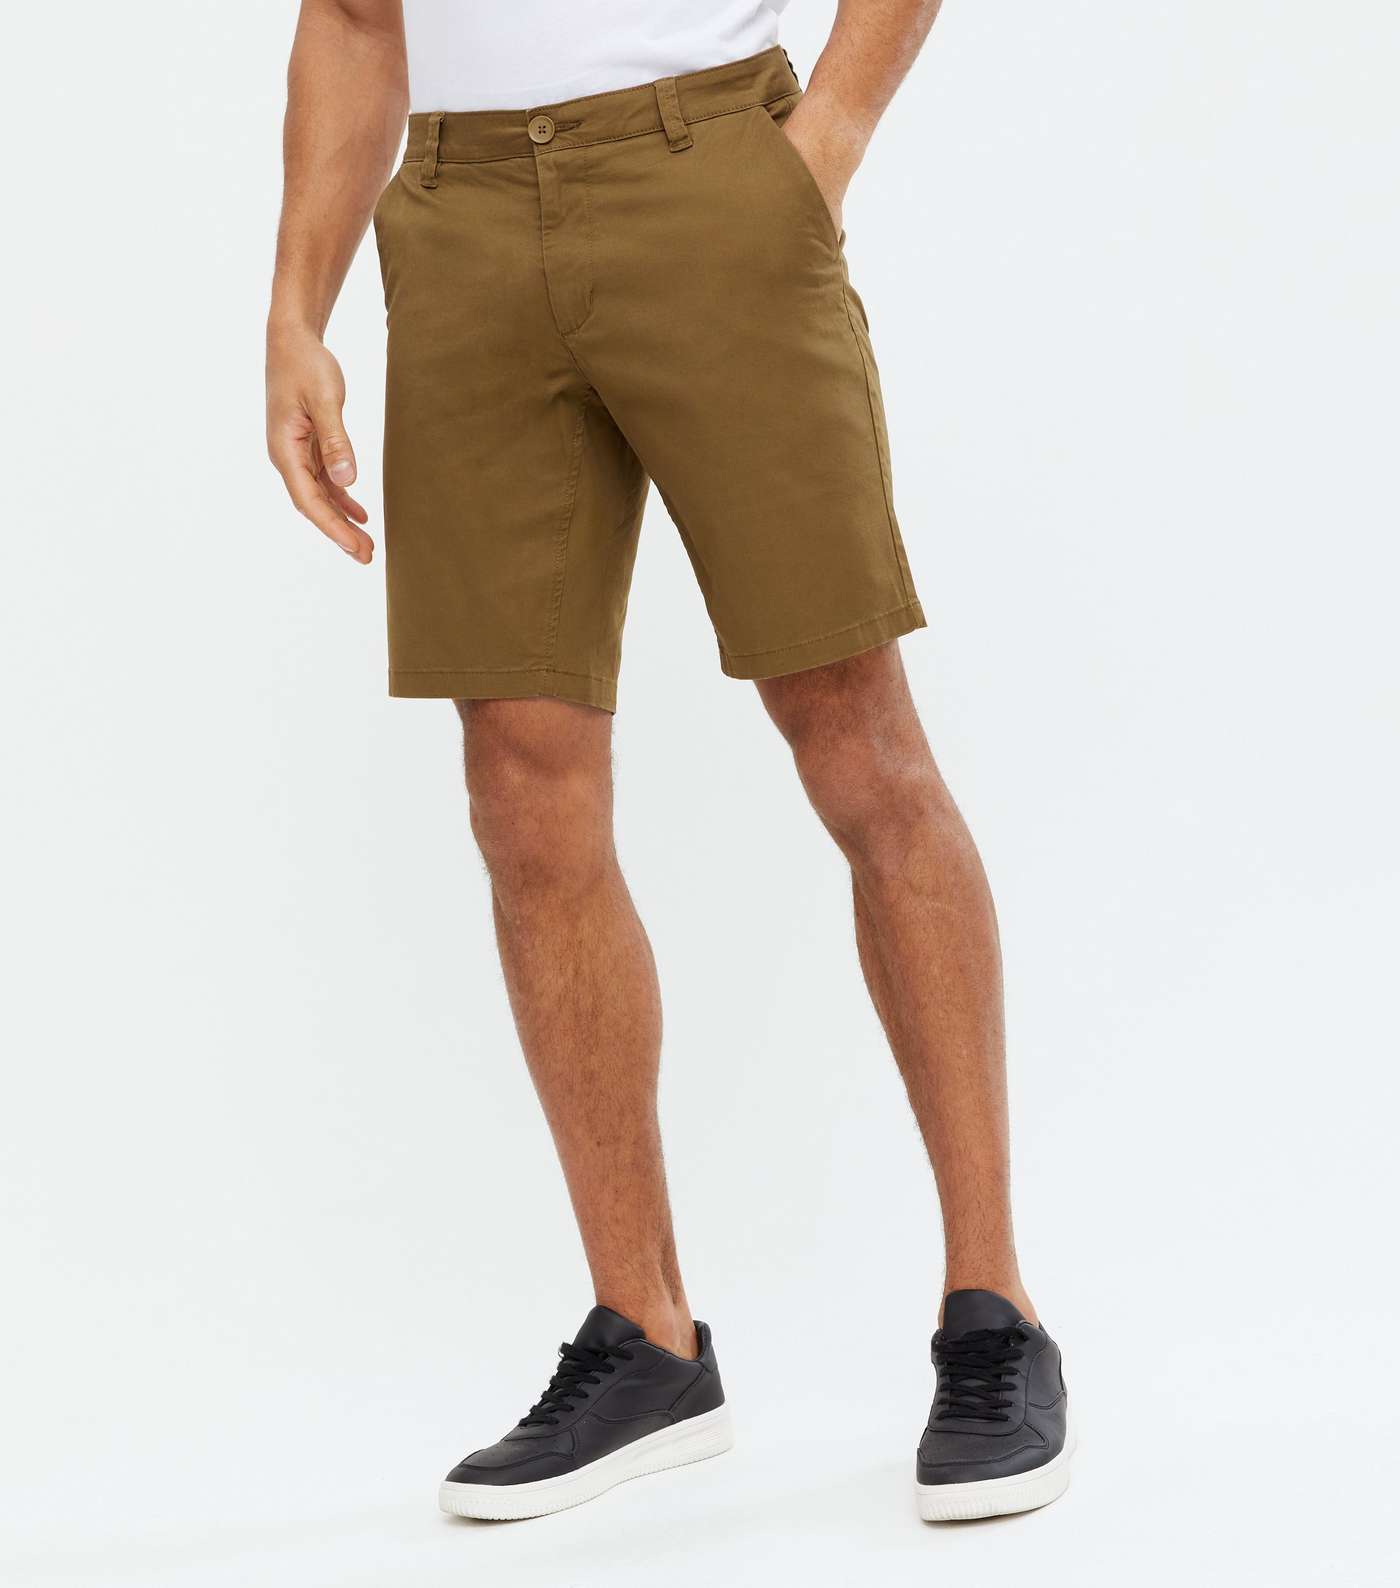 Only & Sons Tan Chino Shorts Image 2